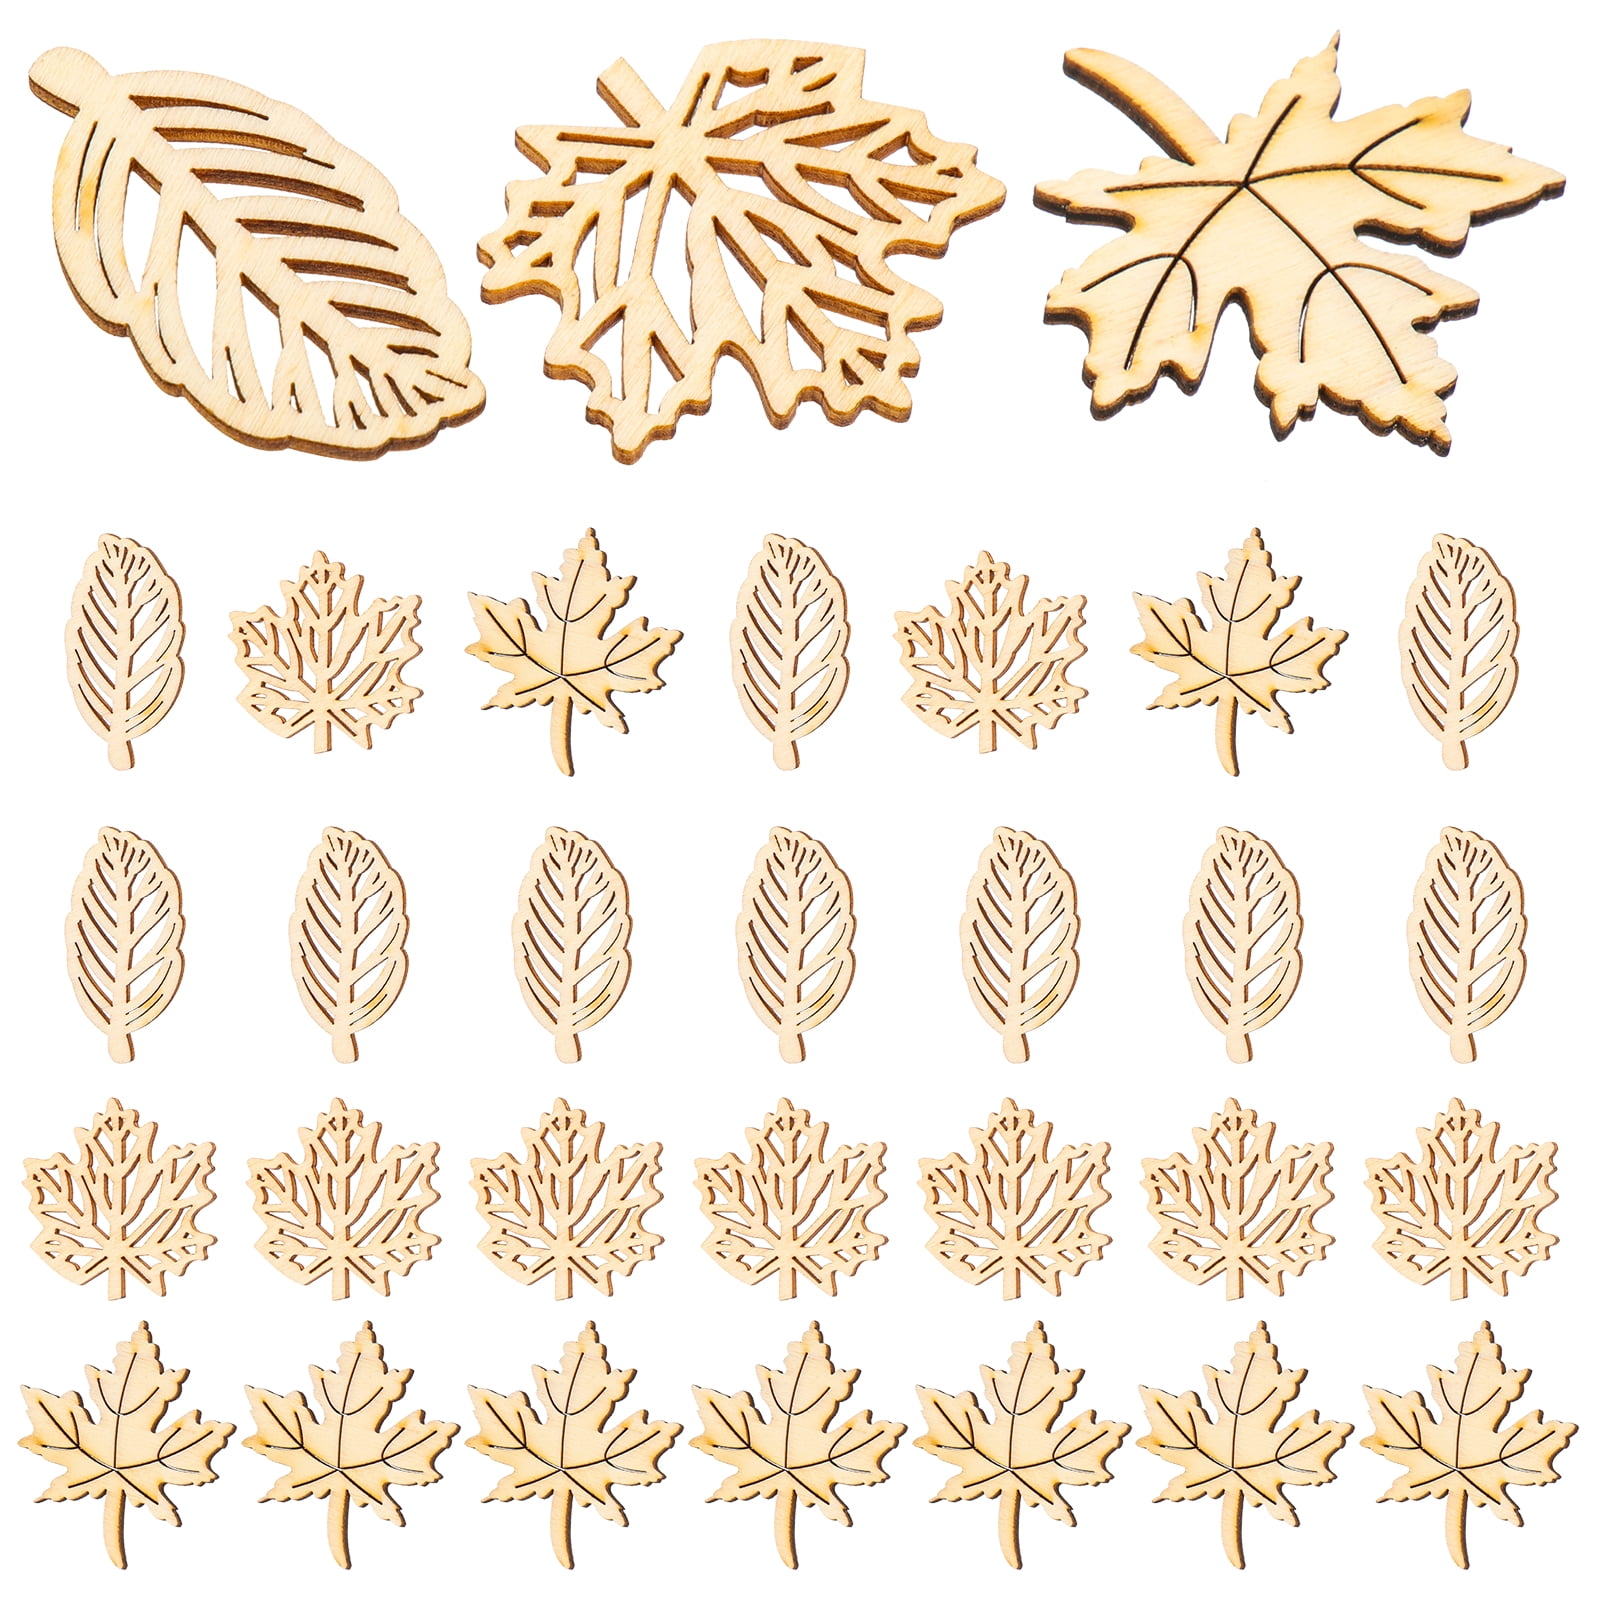  80 Pieces Unfinished Wood Cutouts Maple Leaves Wooden Crafts  Fall Leaves Shape Crafts Autumn Leaf Wooden Cutouts for DIY Craft Tags  Thanksgiving Party Nursery Home Decoration, 4 Styles